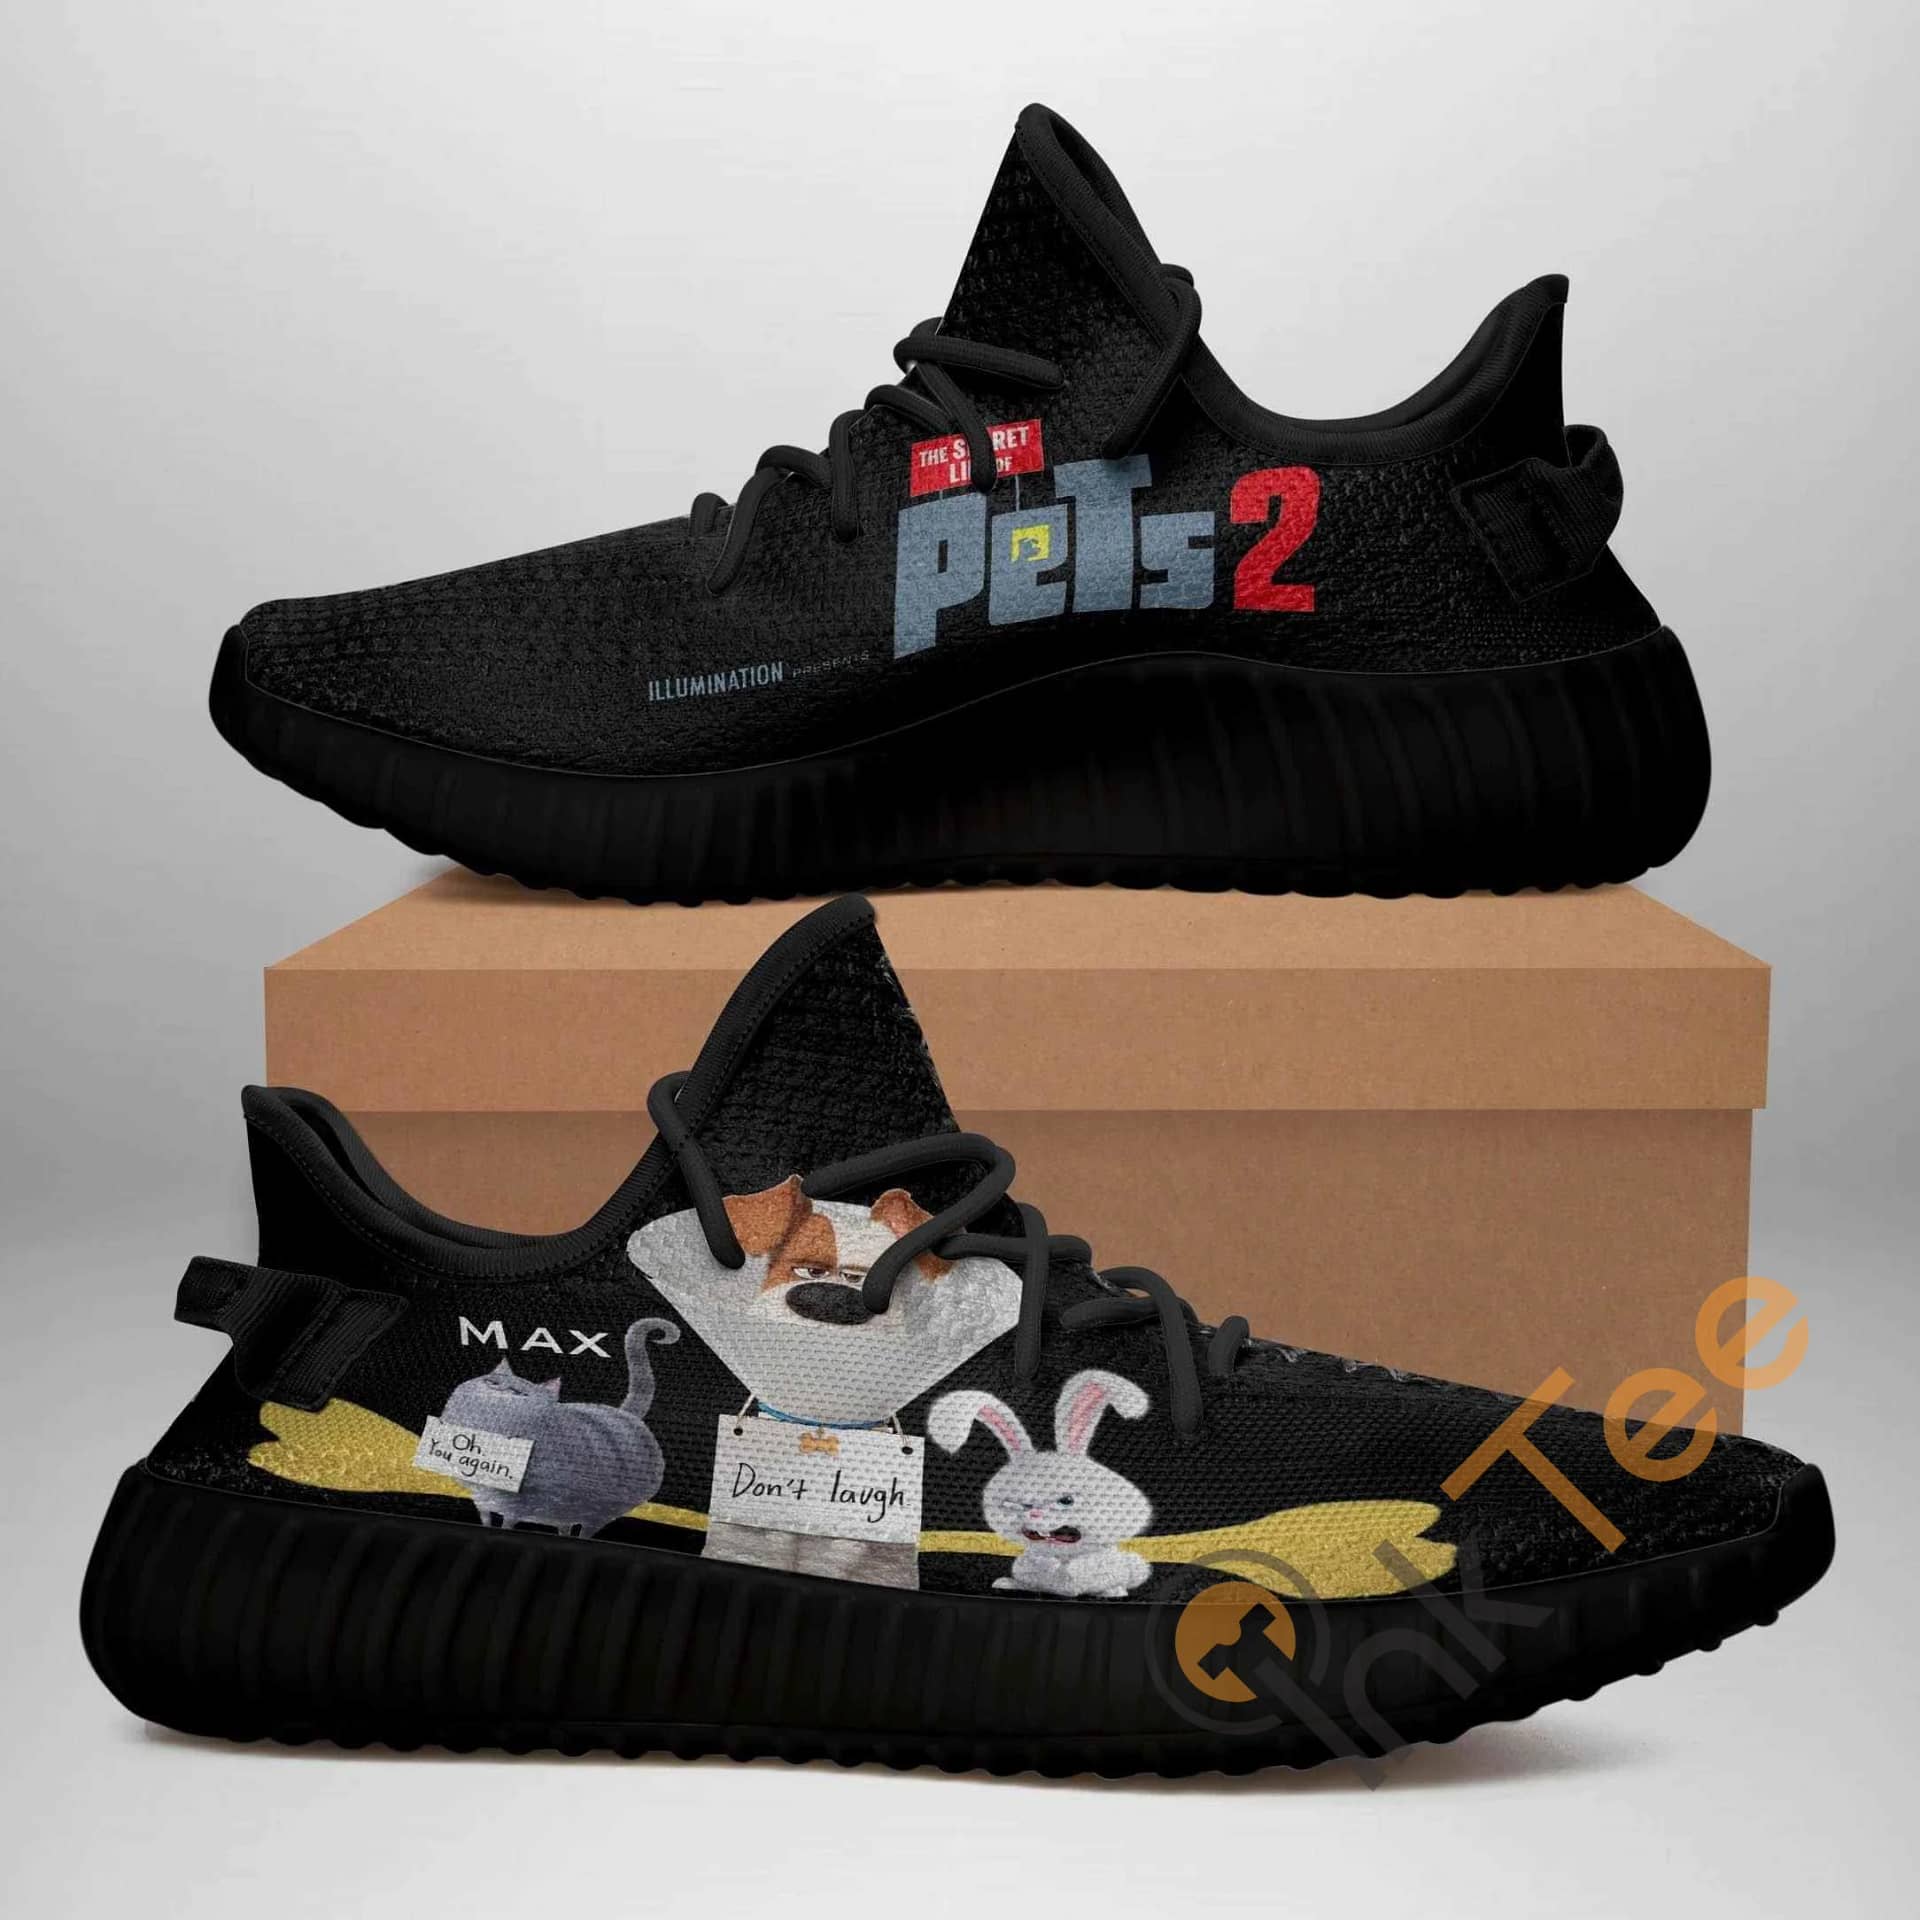 The Secret Life Of Pets 2 Black Edition Amazon Best Selling Yeezy Boost